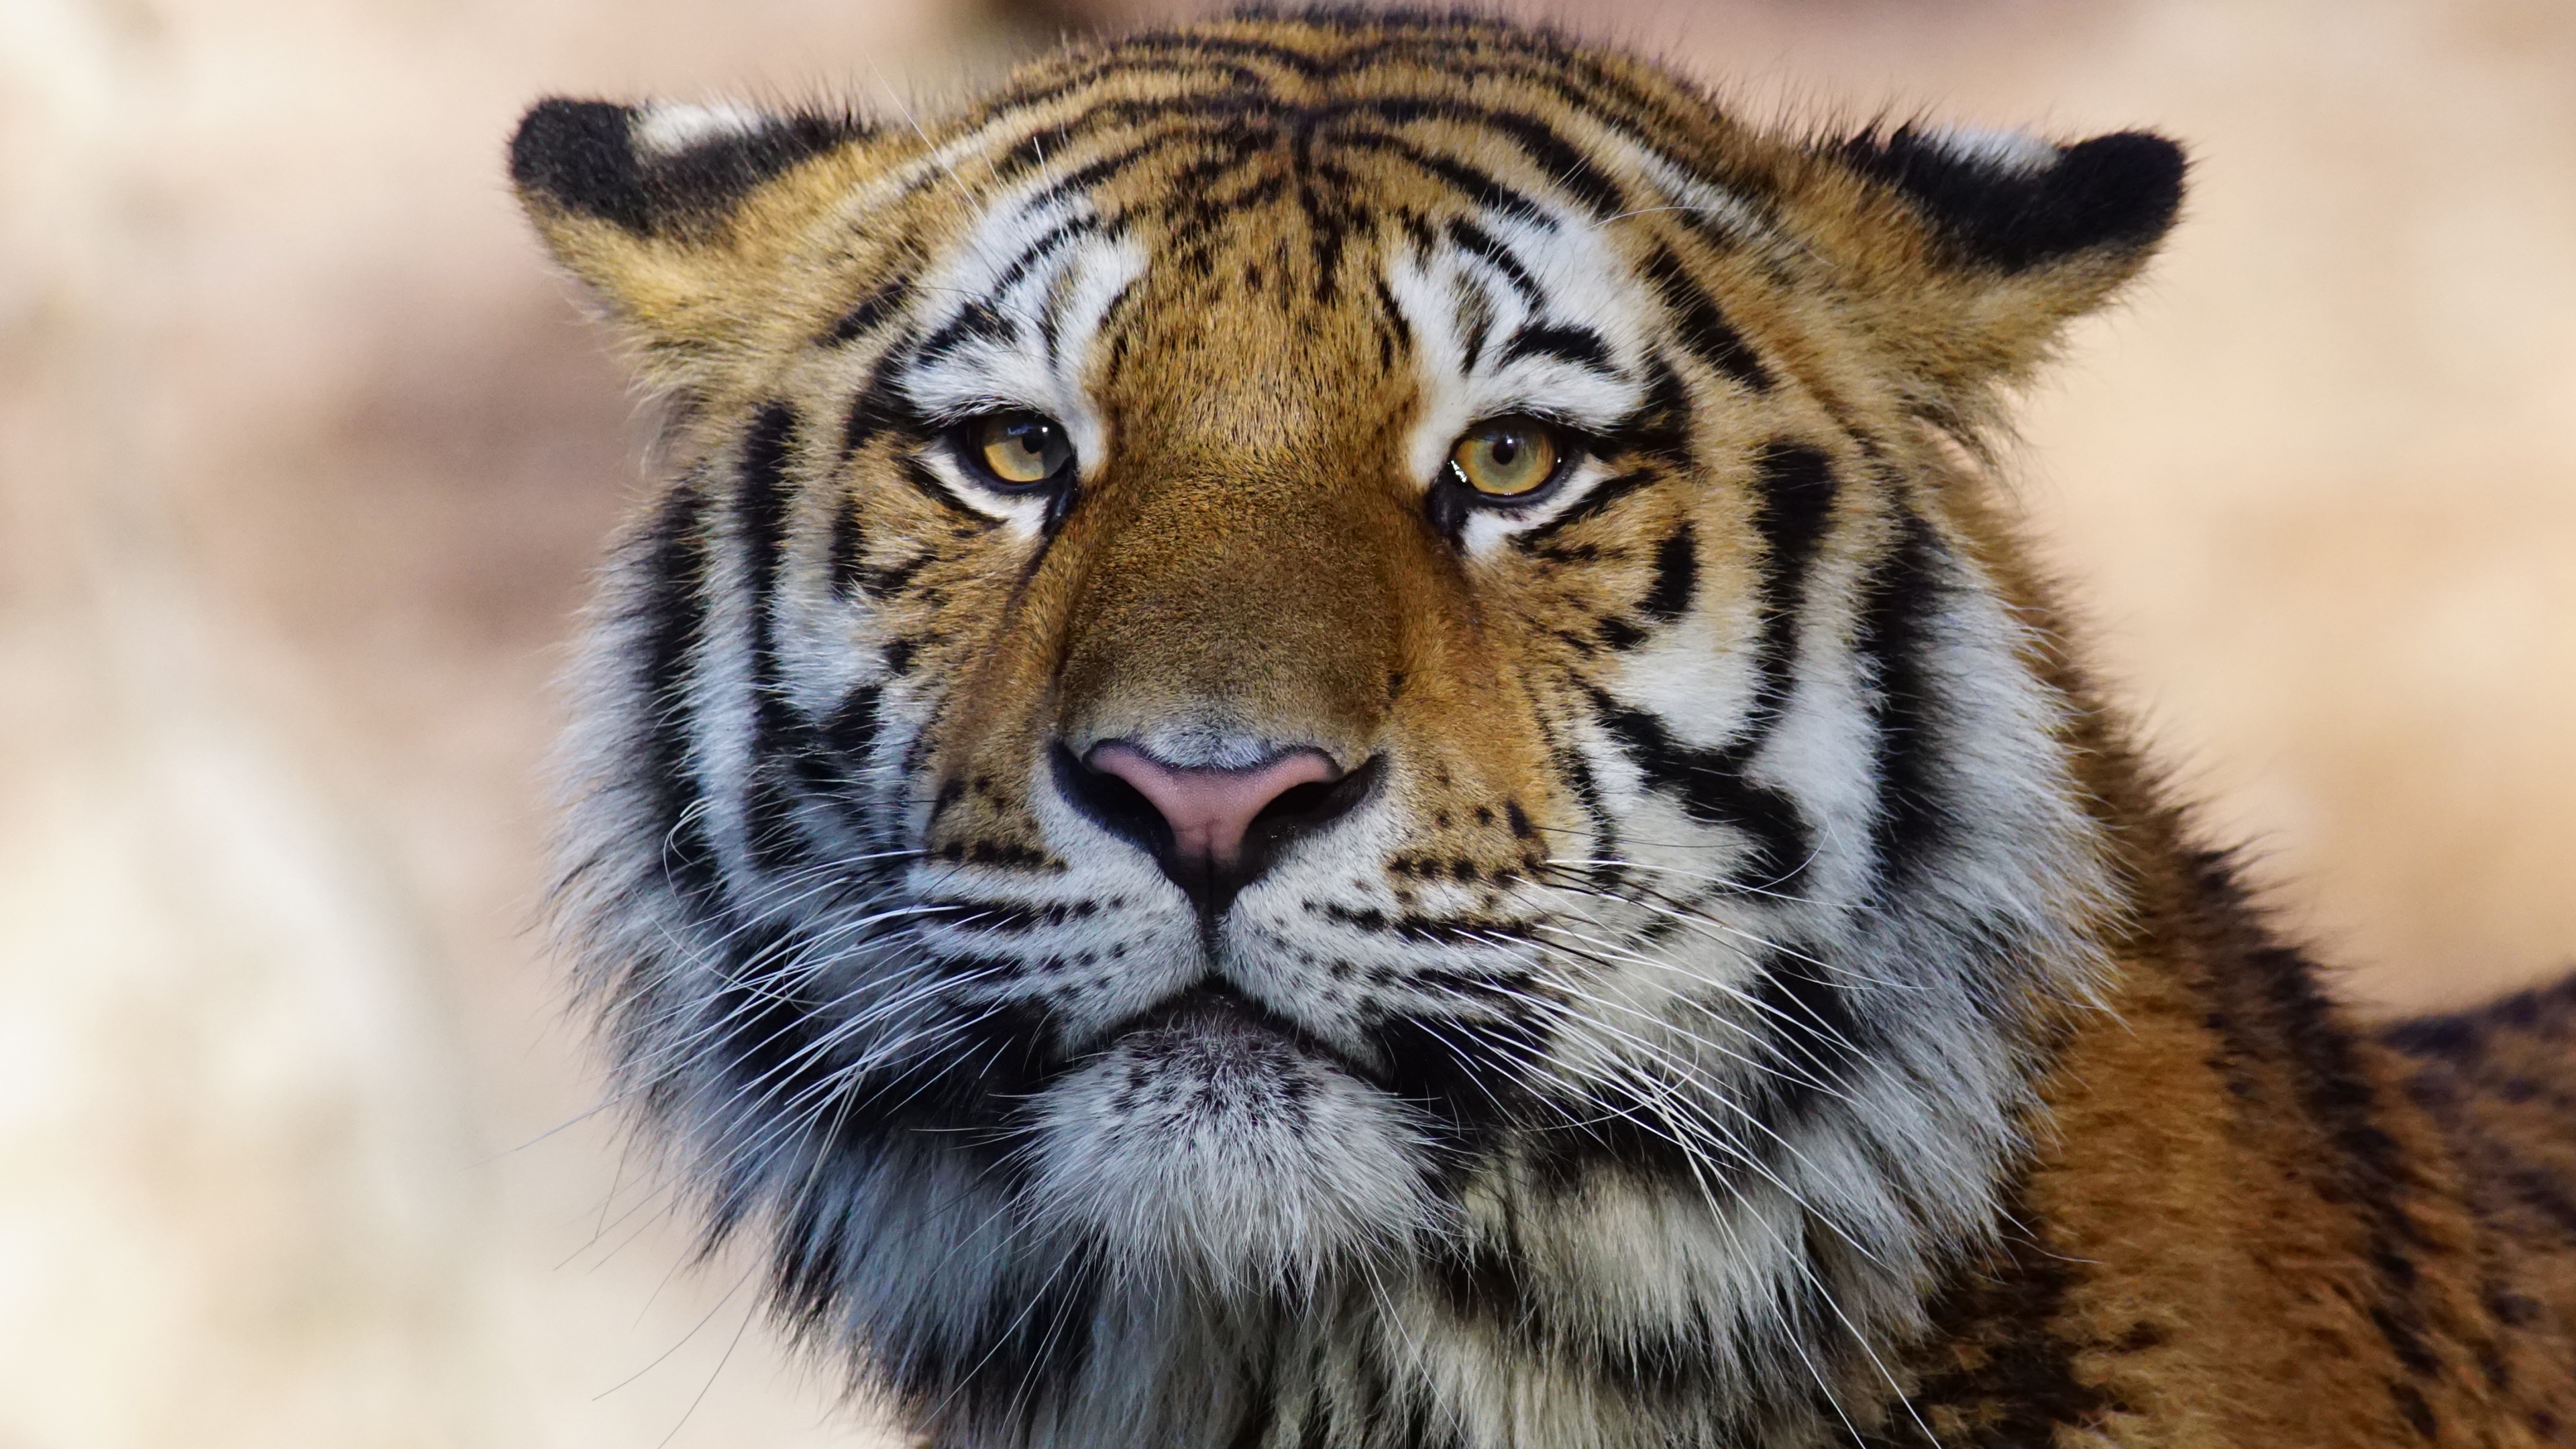 Tiger Wild Animal 4K, Hd Animals, 4K Wallpapers, Images, Backgrounds